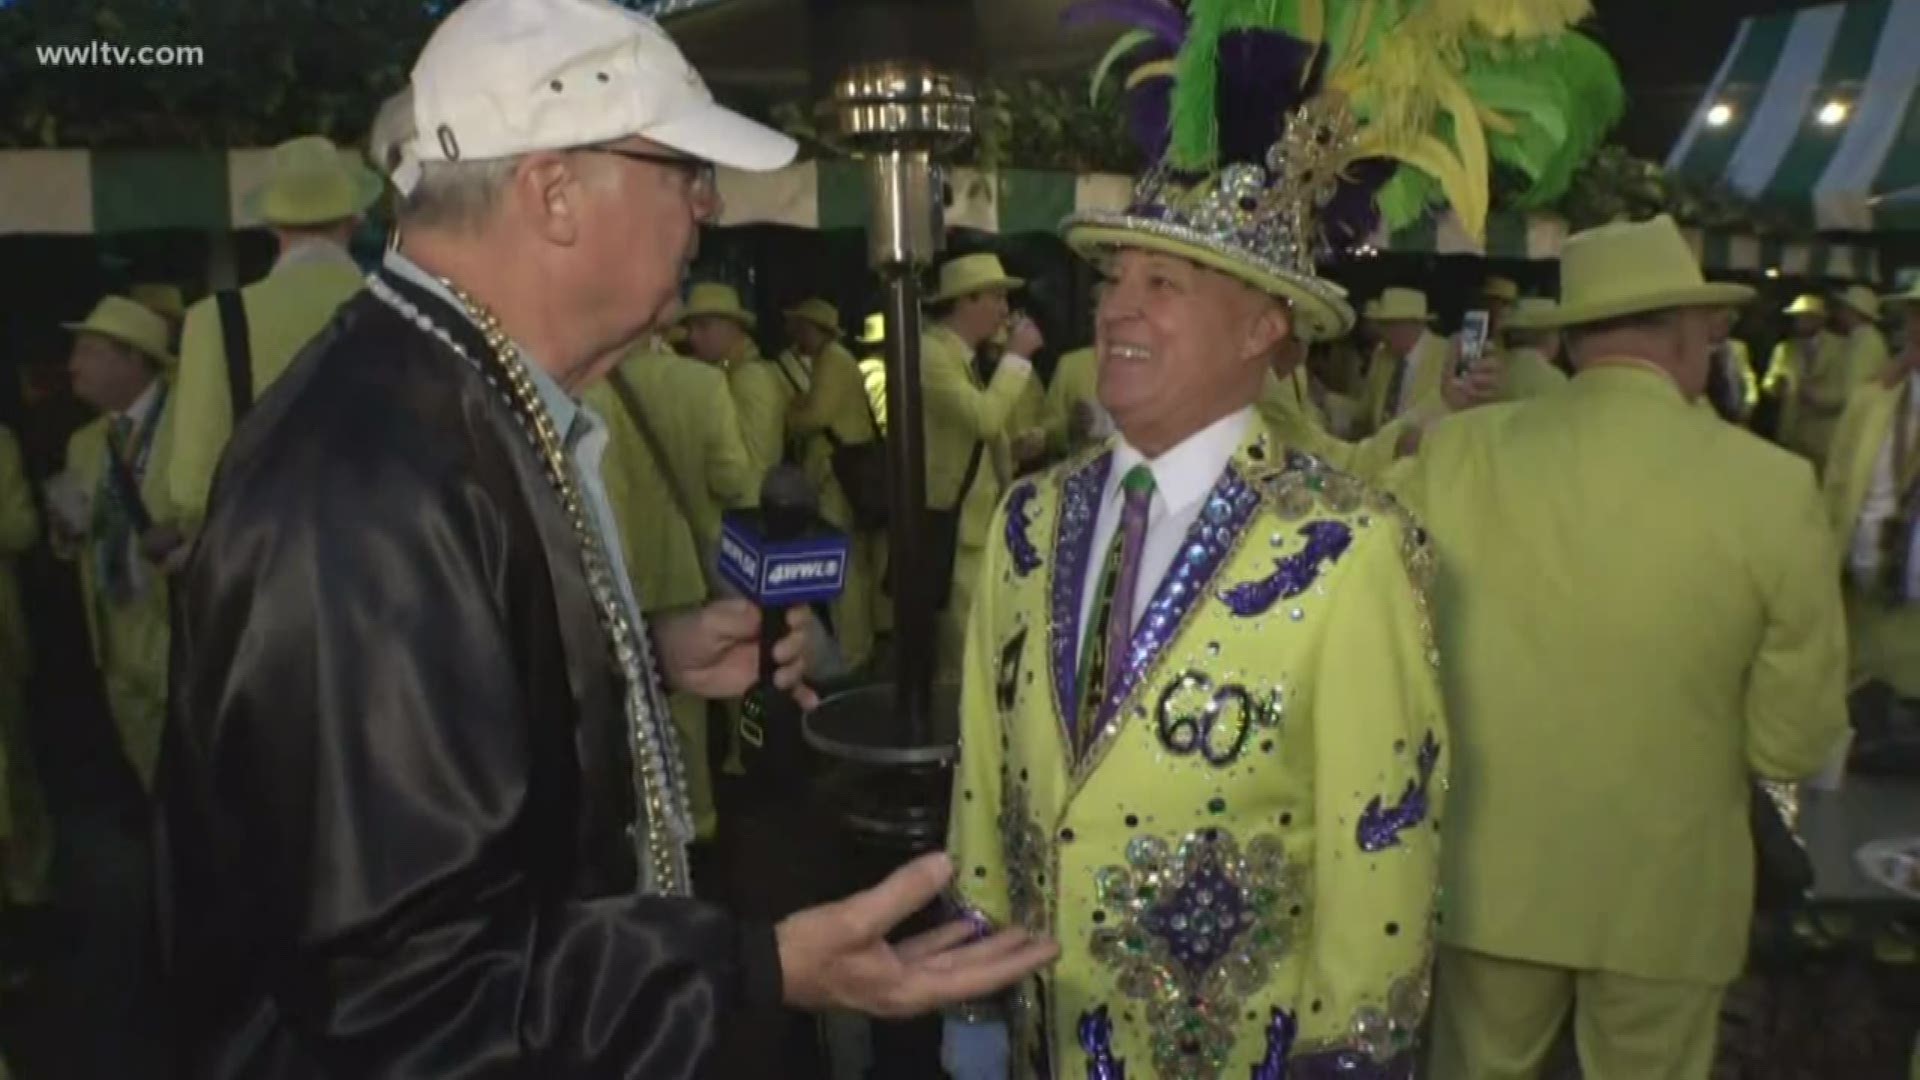 It's the 60th anniversary of Pete Fountain's Half-fast Walking Club, and our old friend Bill Capo is here to celebrate with them this Mardi Gras.